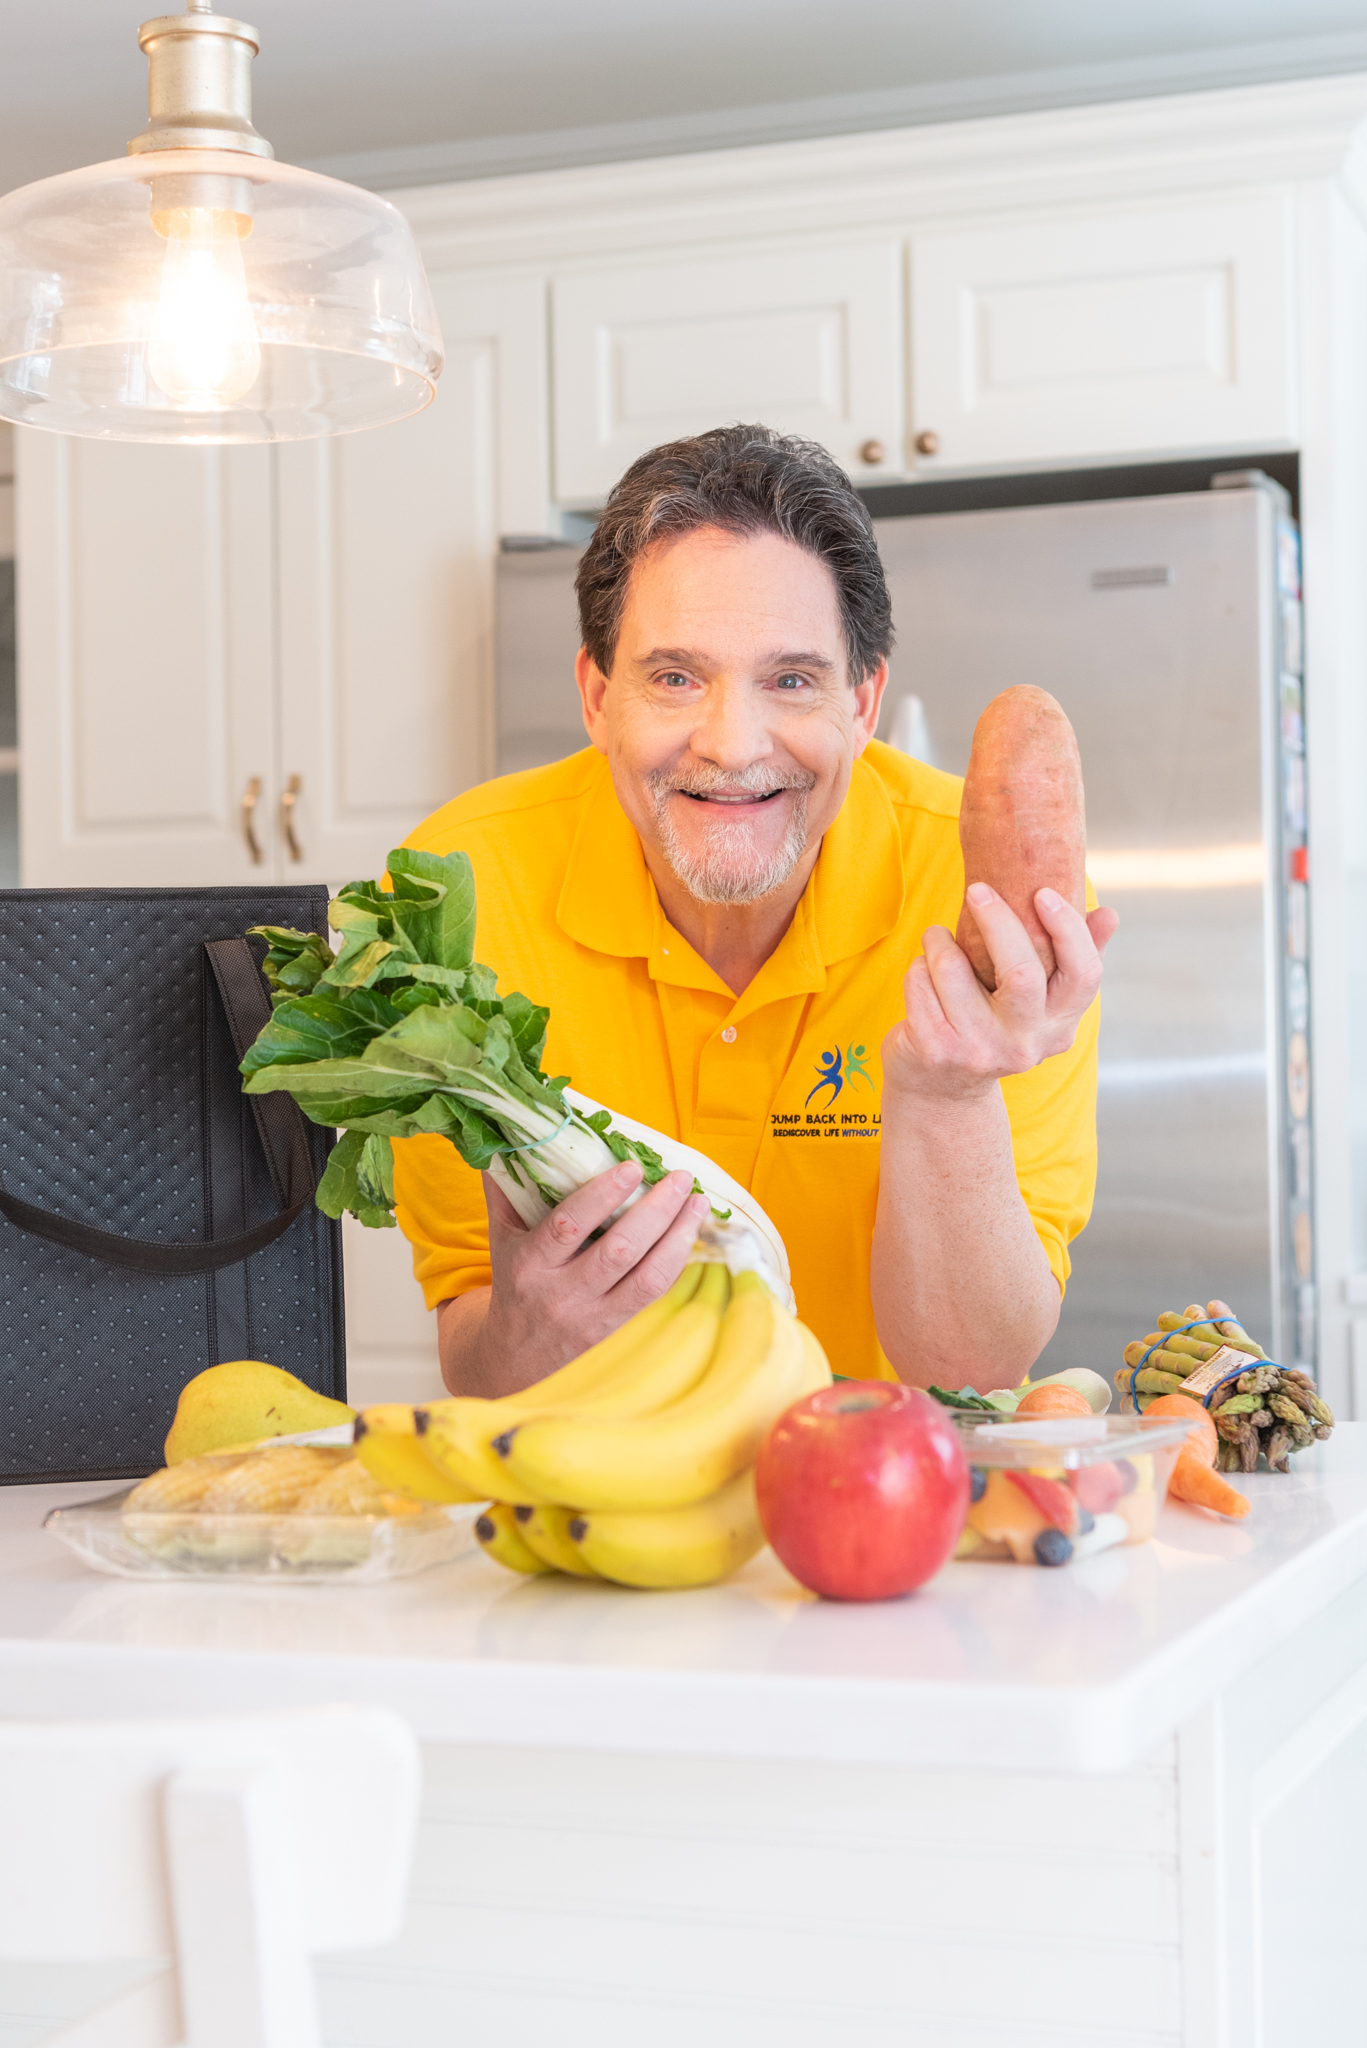 A male health coach with lots of fruits and veggies in his kitchen.